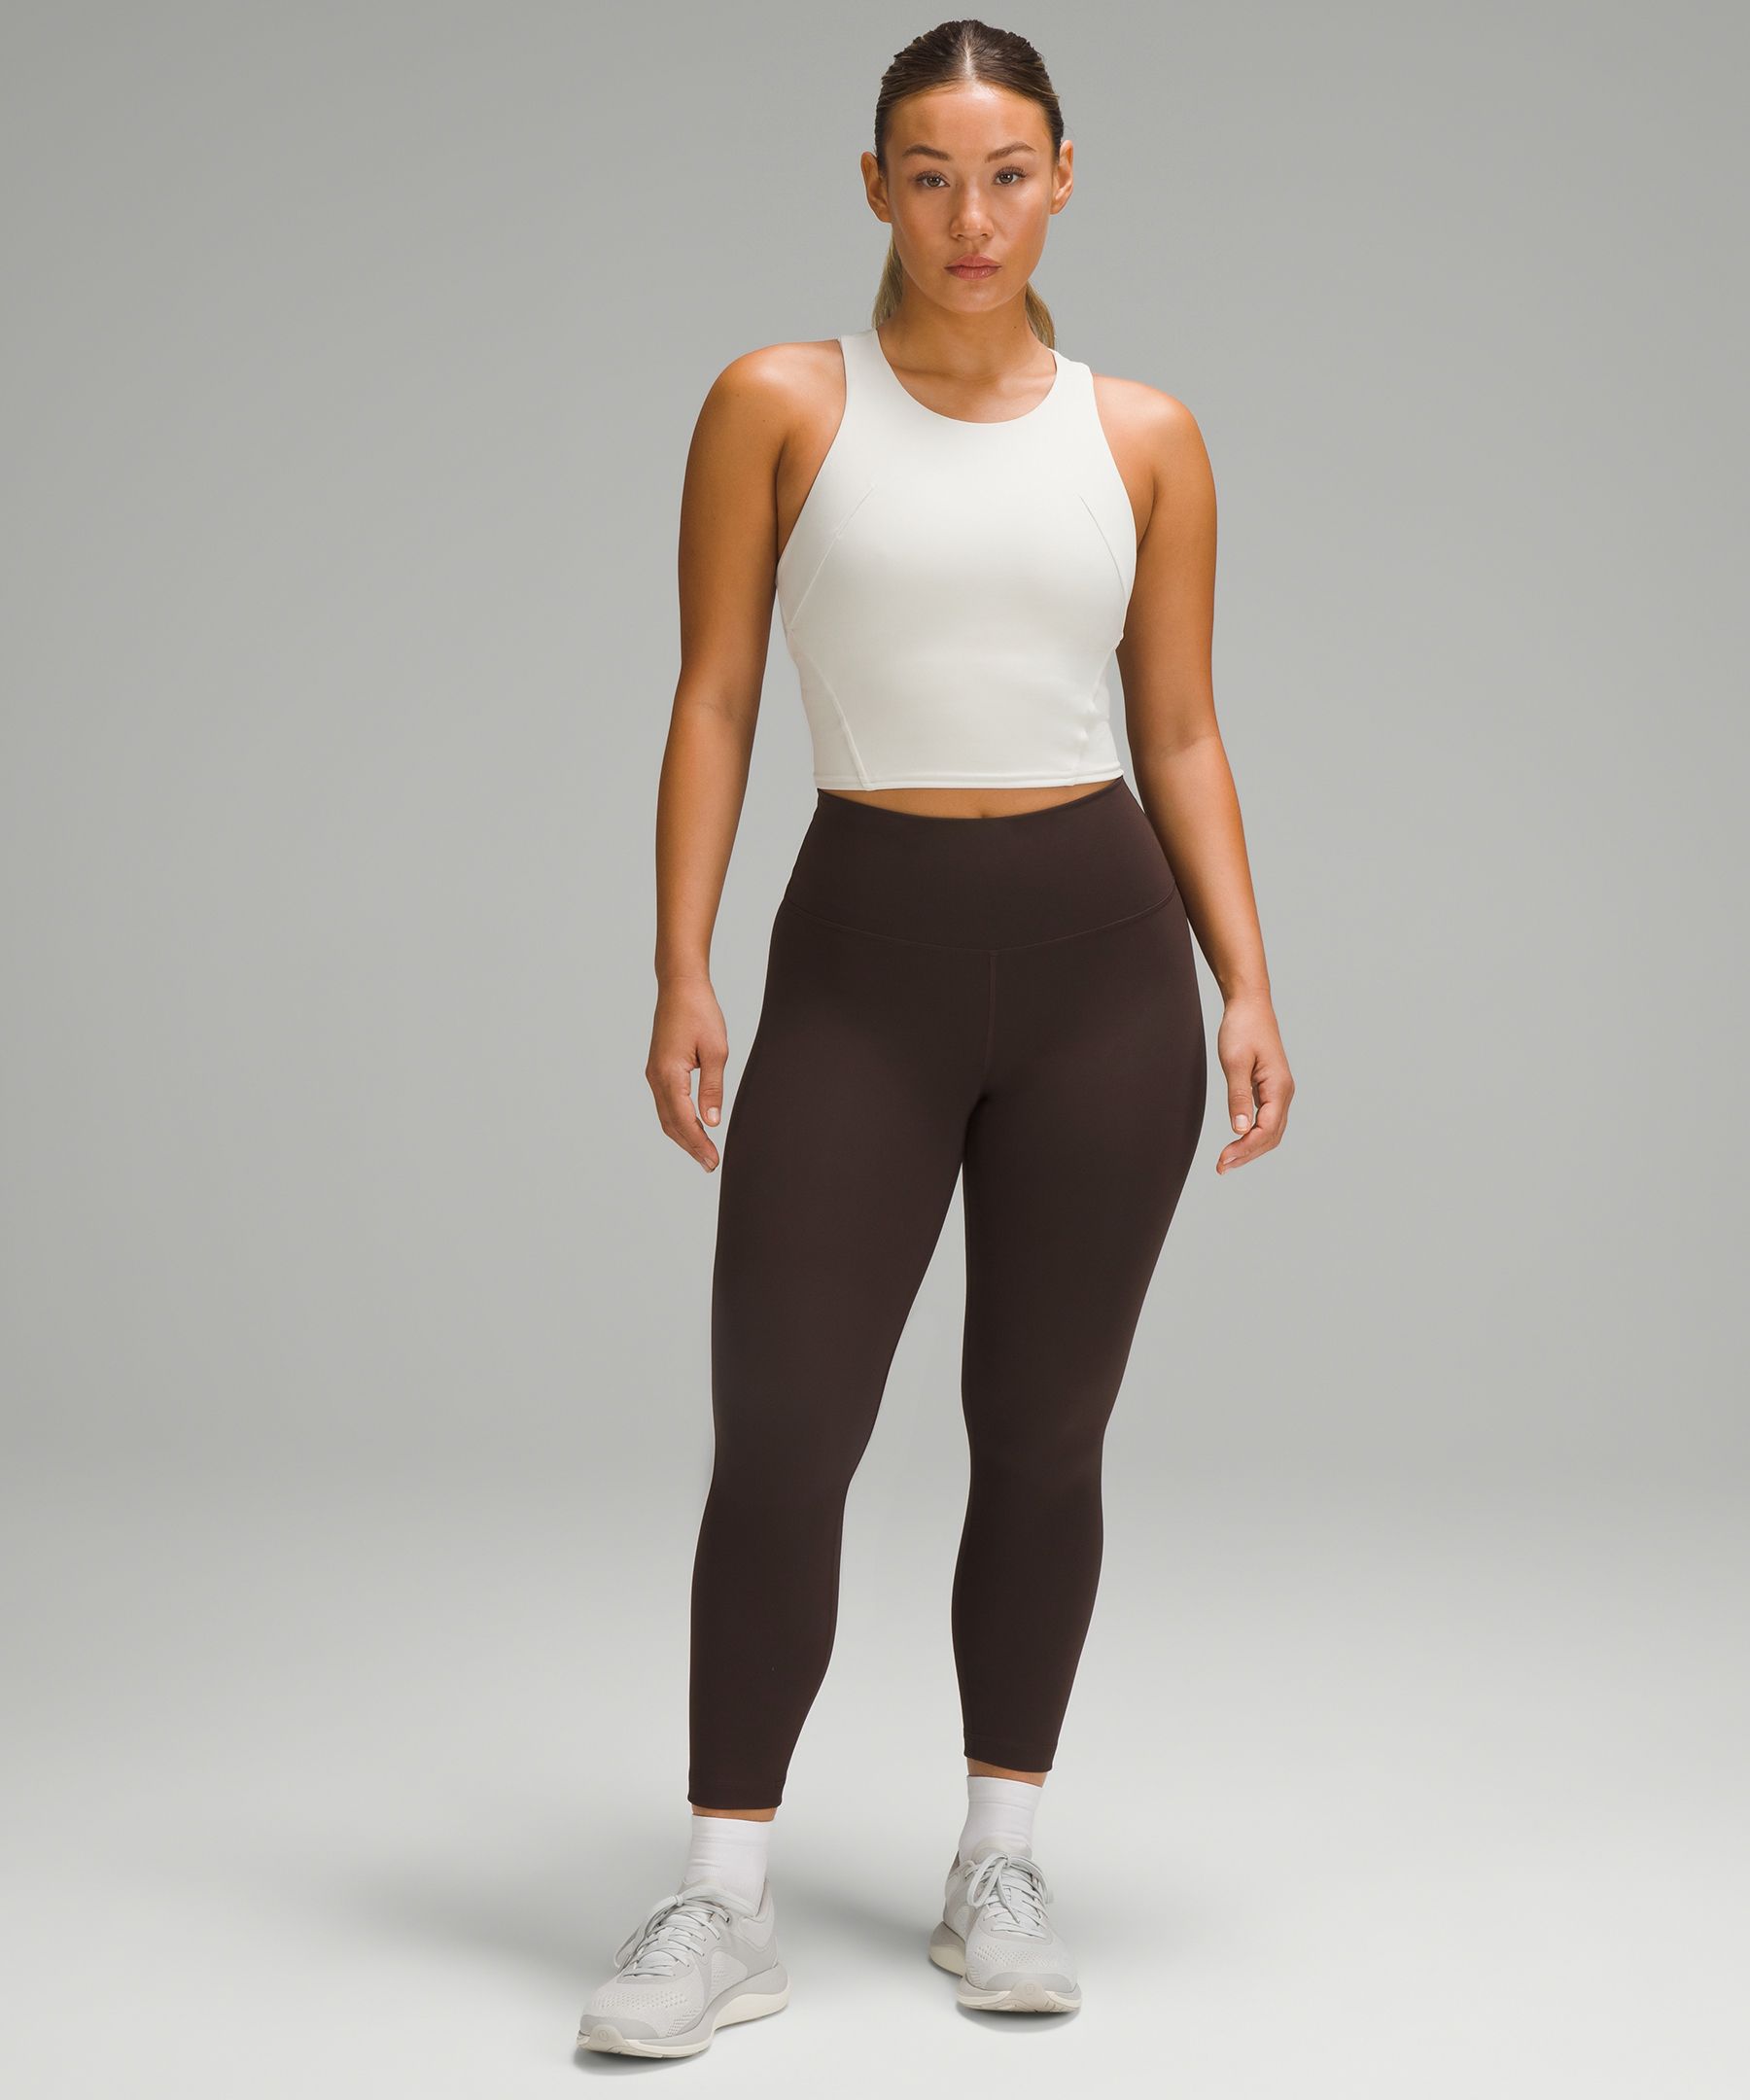 Lulu lifting fit (wunder train contour fit size 12 black, align tank size  14 heathered tidewater teal) : r/lululemon